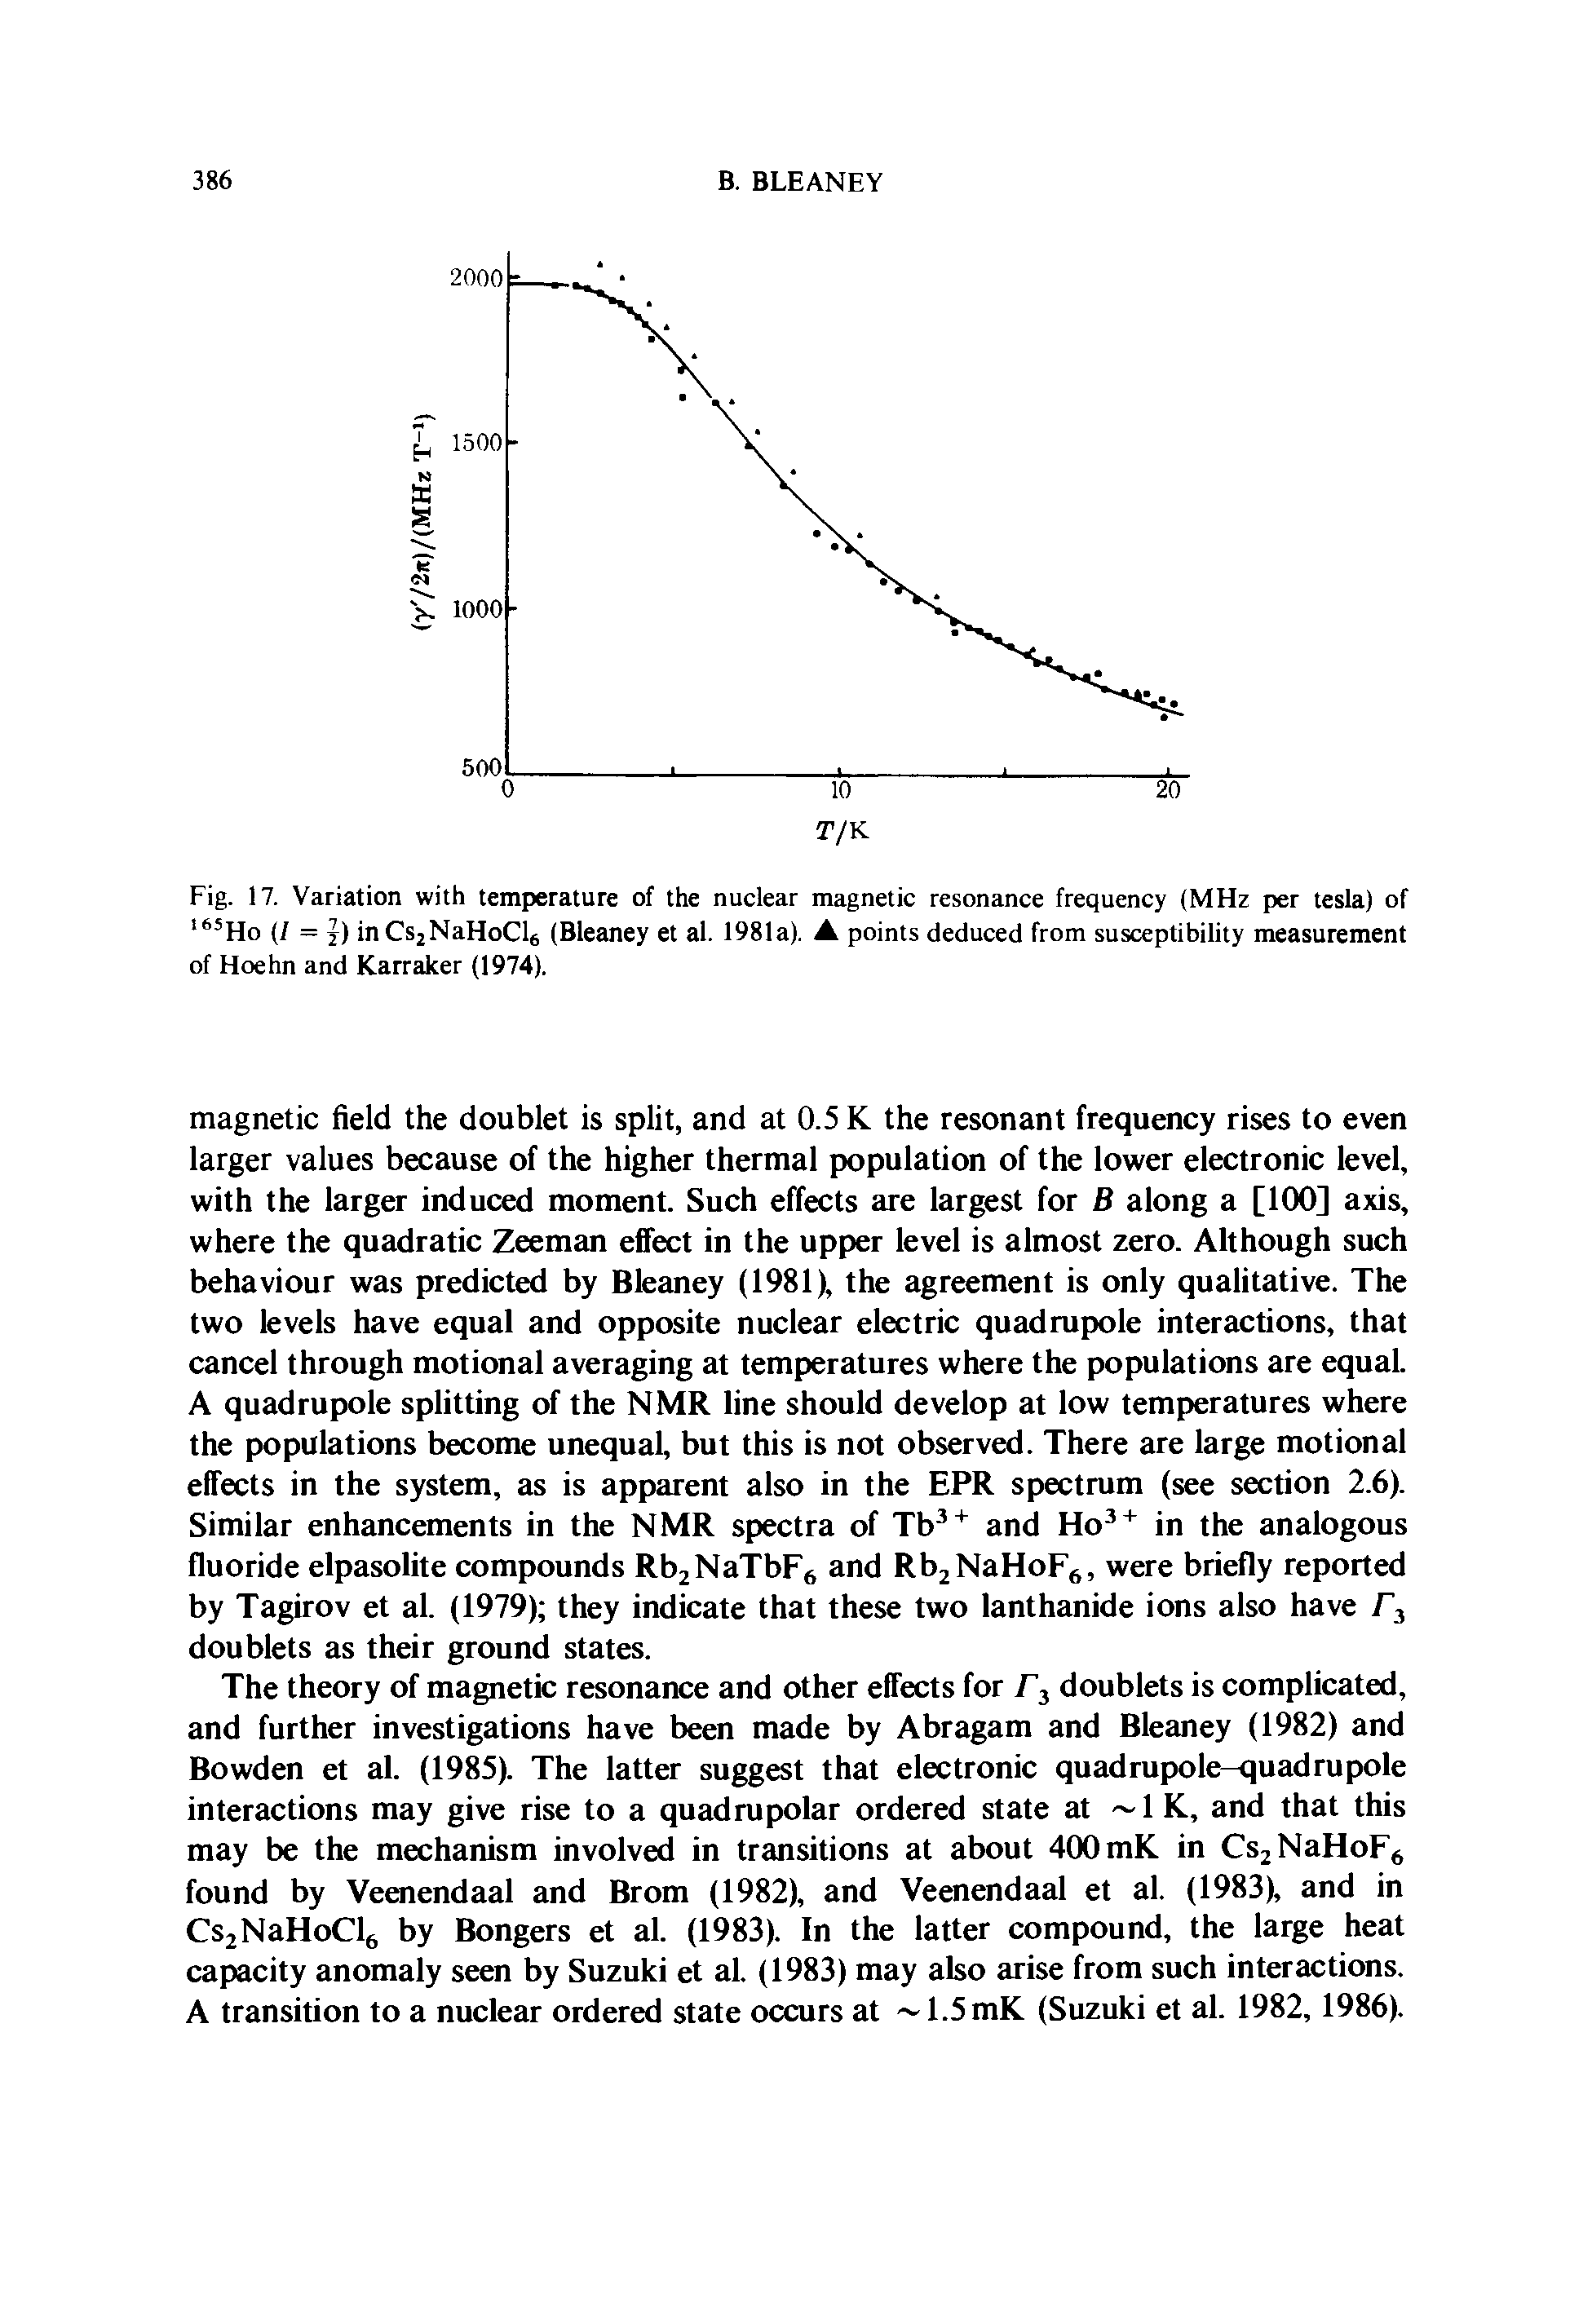 Fig. 17. Variation with temperature of the nuclear magnetic resonance frequency (MHz per tesla) of " Ho (/ = j) inCsjNaHoCle (Bleaney et al. 1981a). A points deduced from susceptibility measurement of Hoehn and Karraker (1974).